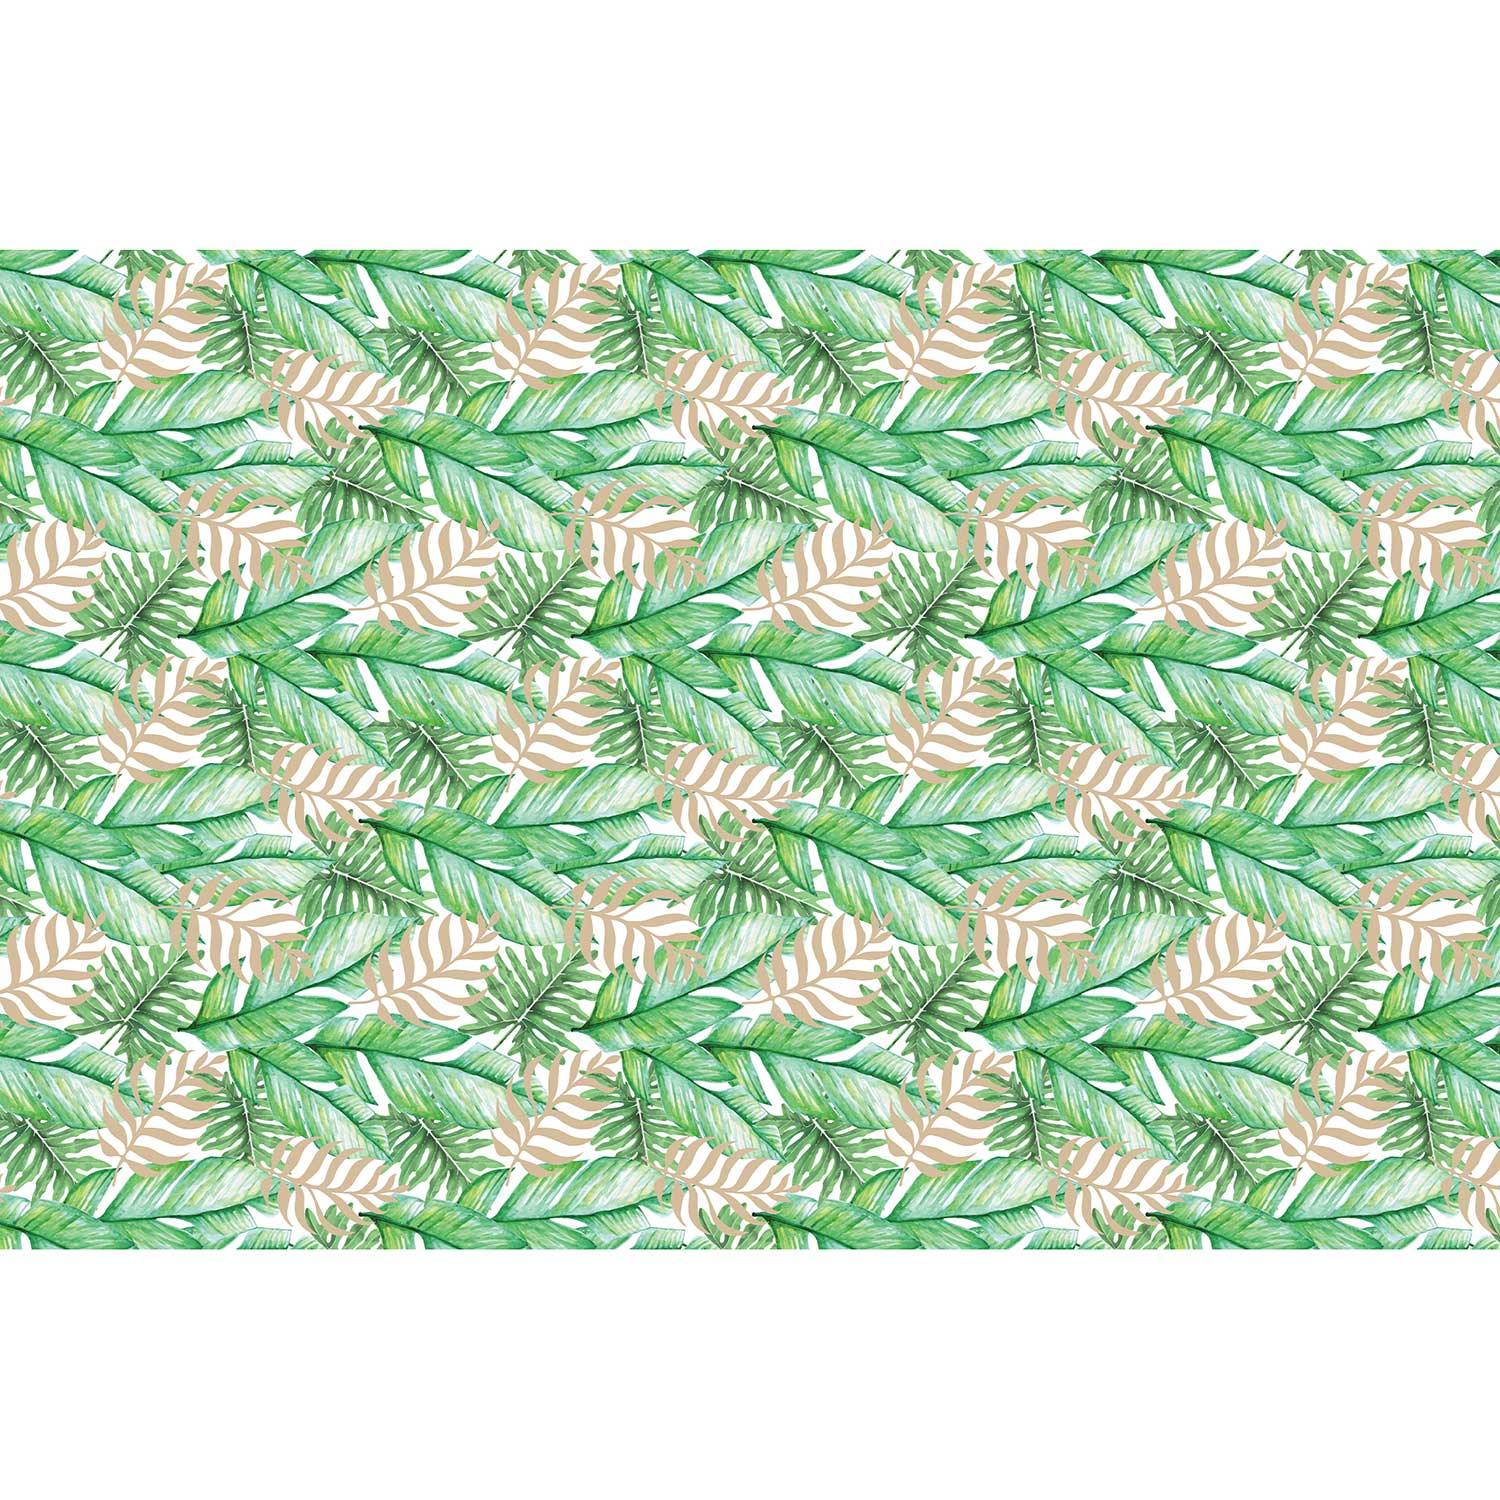 Tropic Thunder 20" x 30" Gift Tissue Paper by Present Paper - Vysn